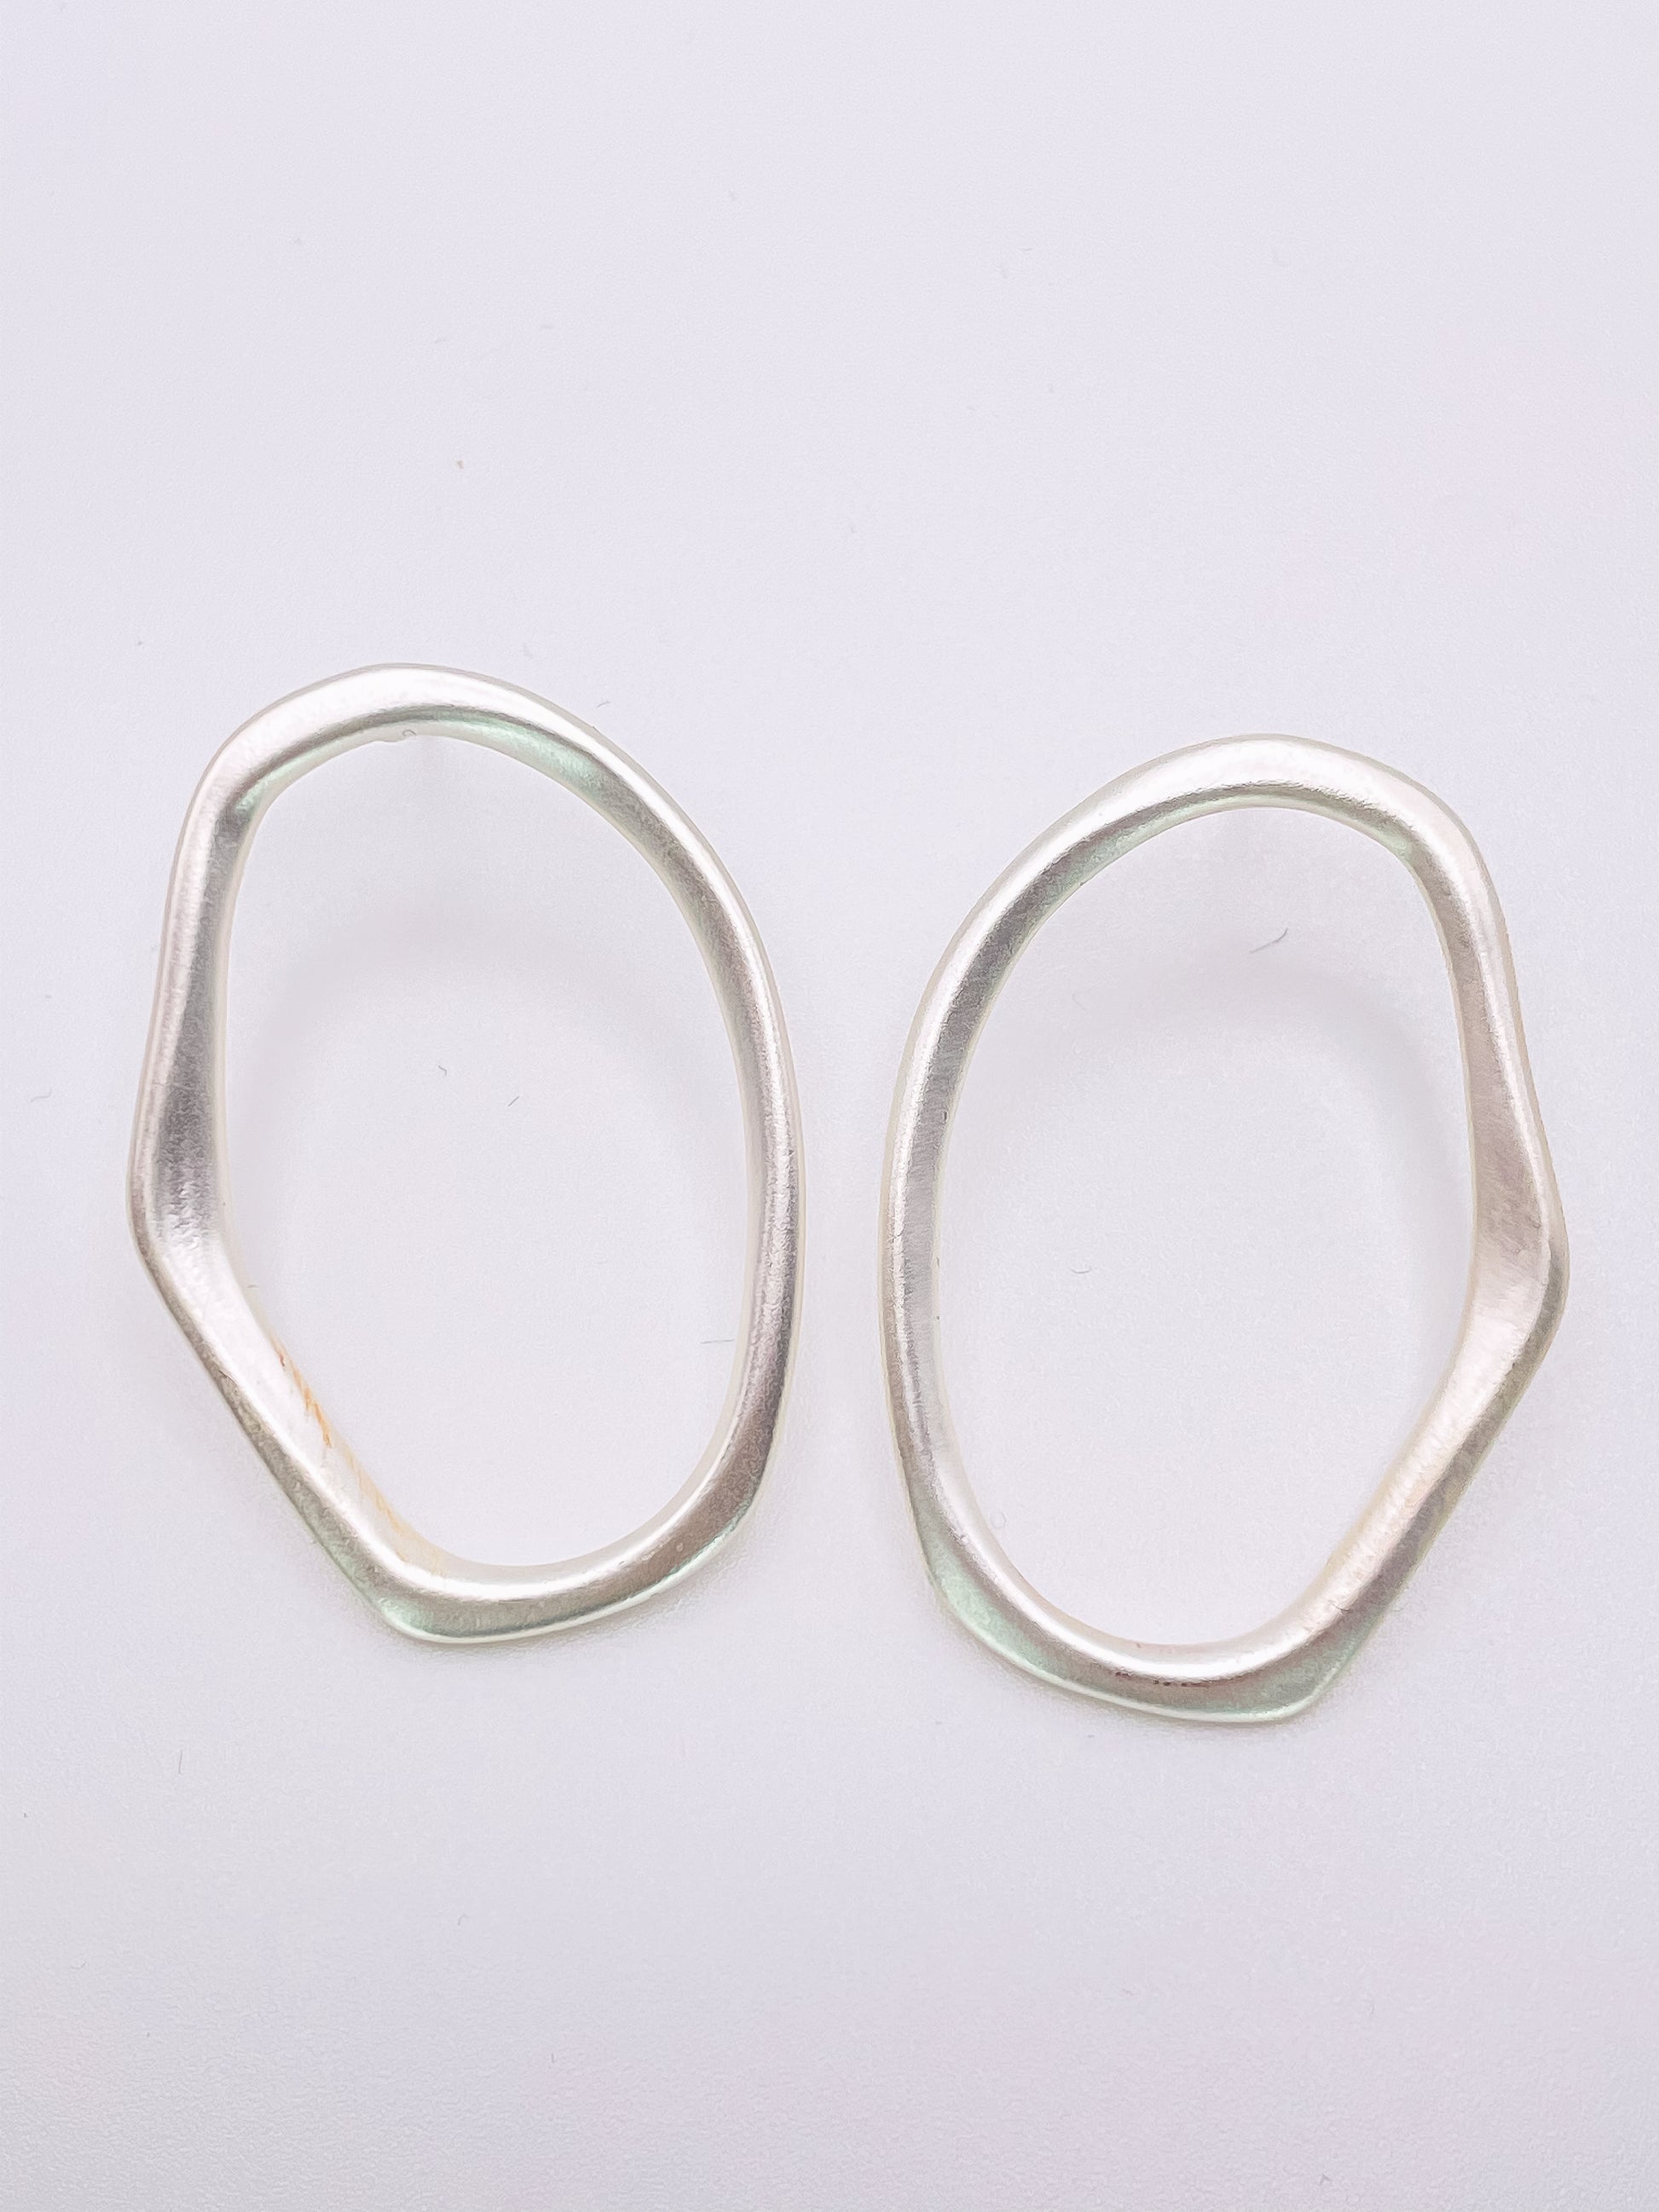 silver hoops that are imperfect oval hoops.